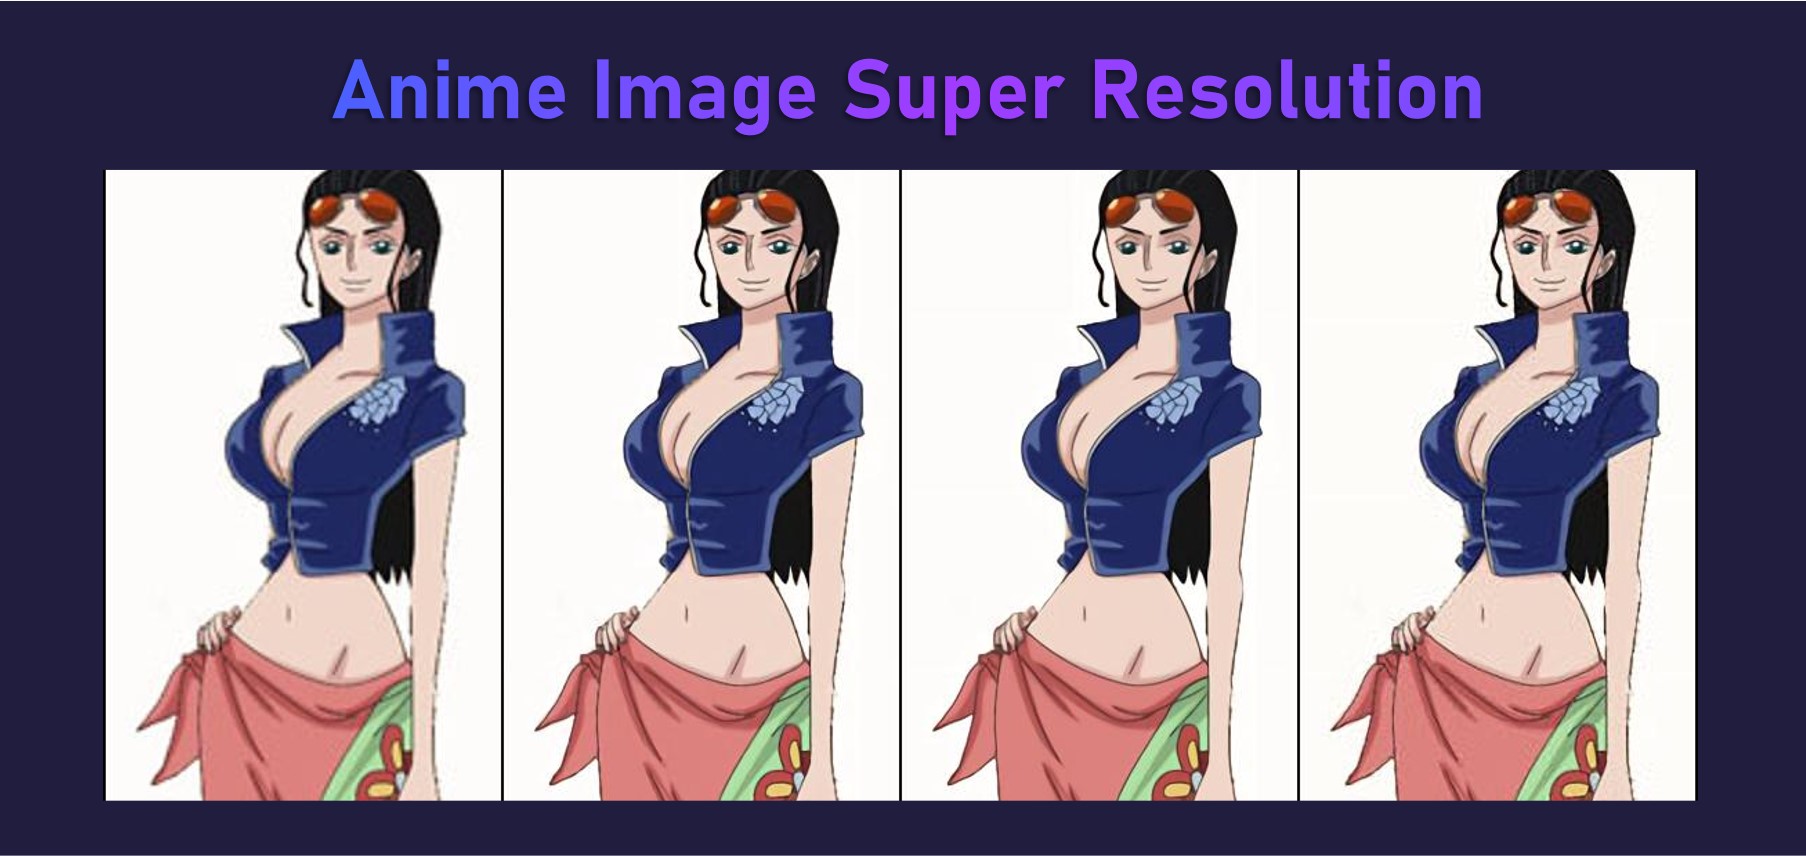 Anime Image Super Resolution with PyTorch and Waifu2x